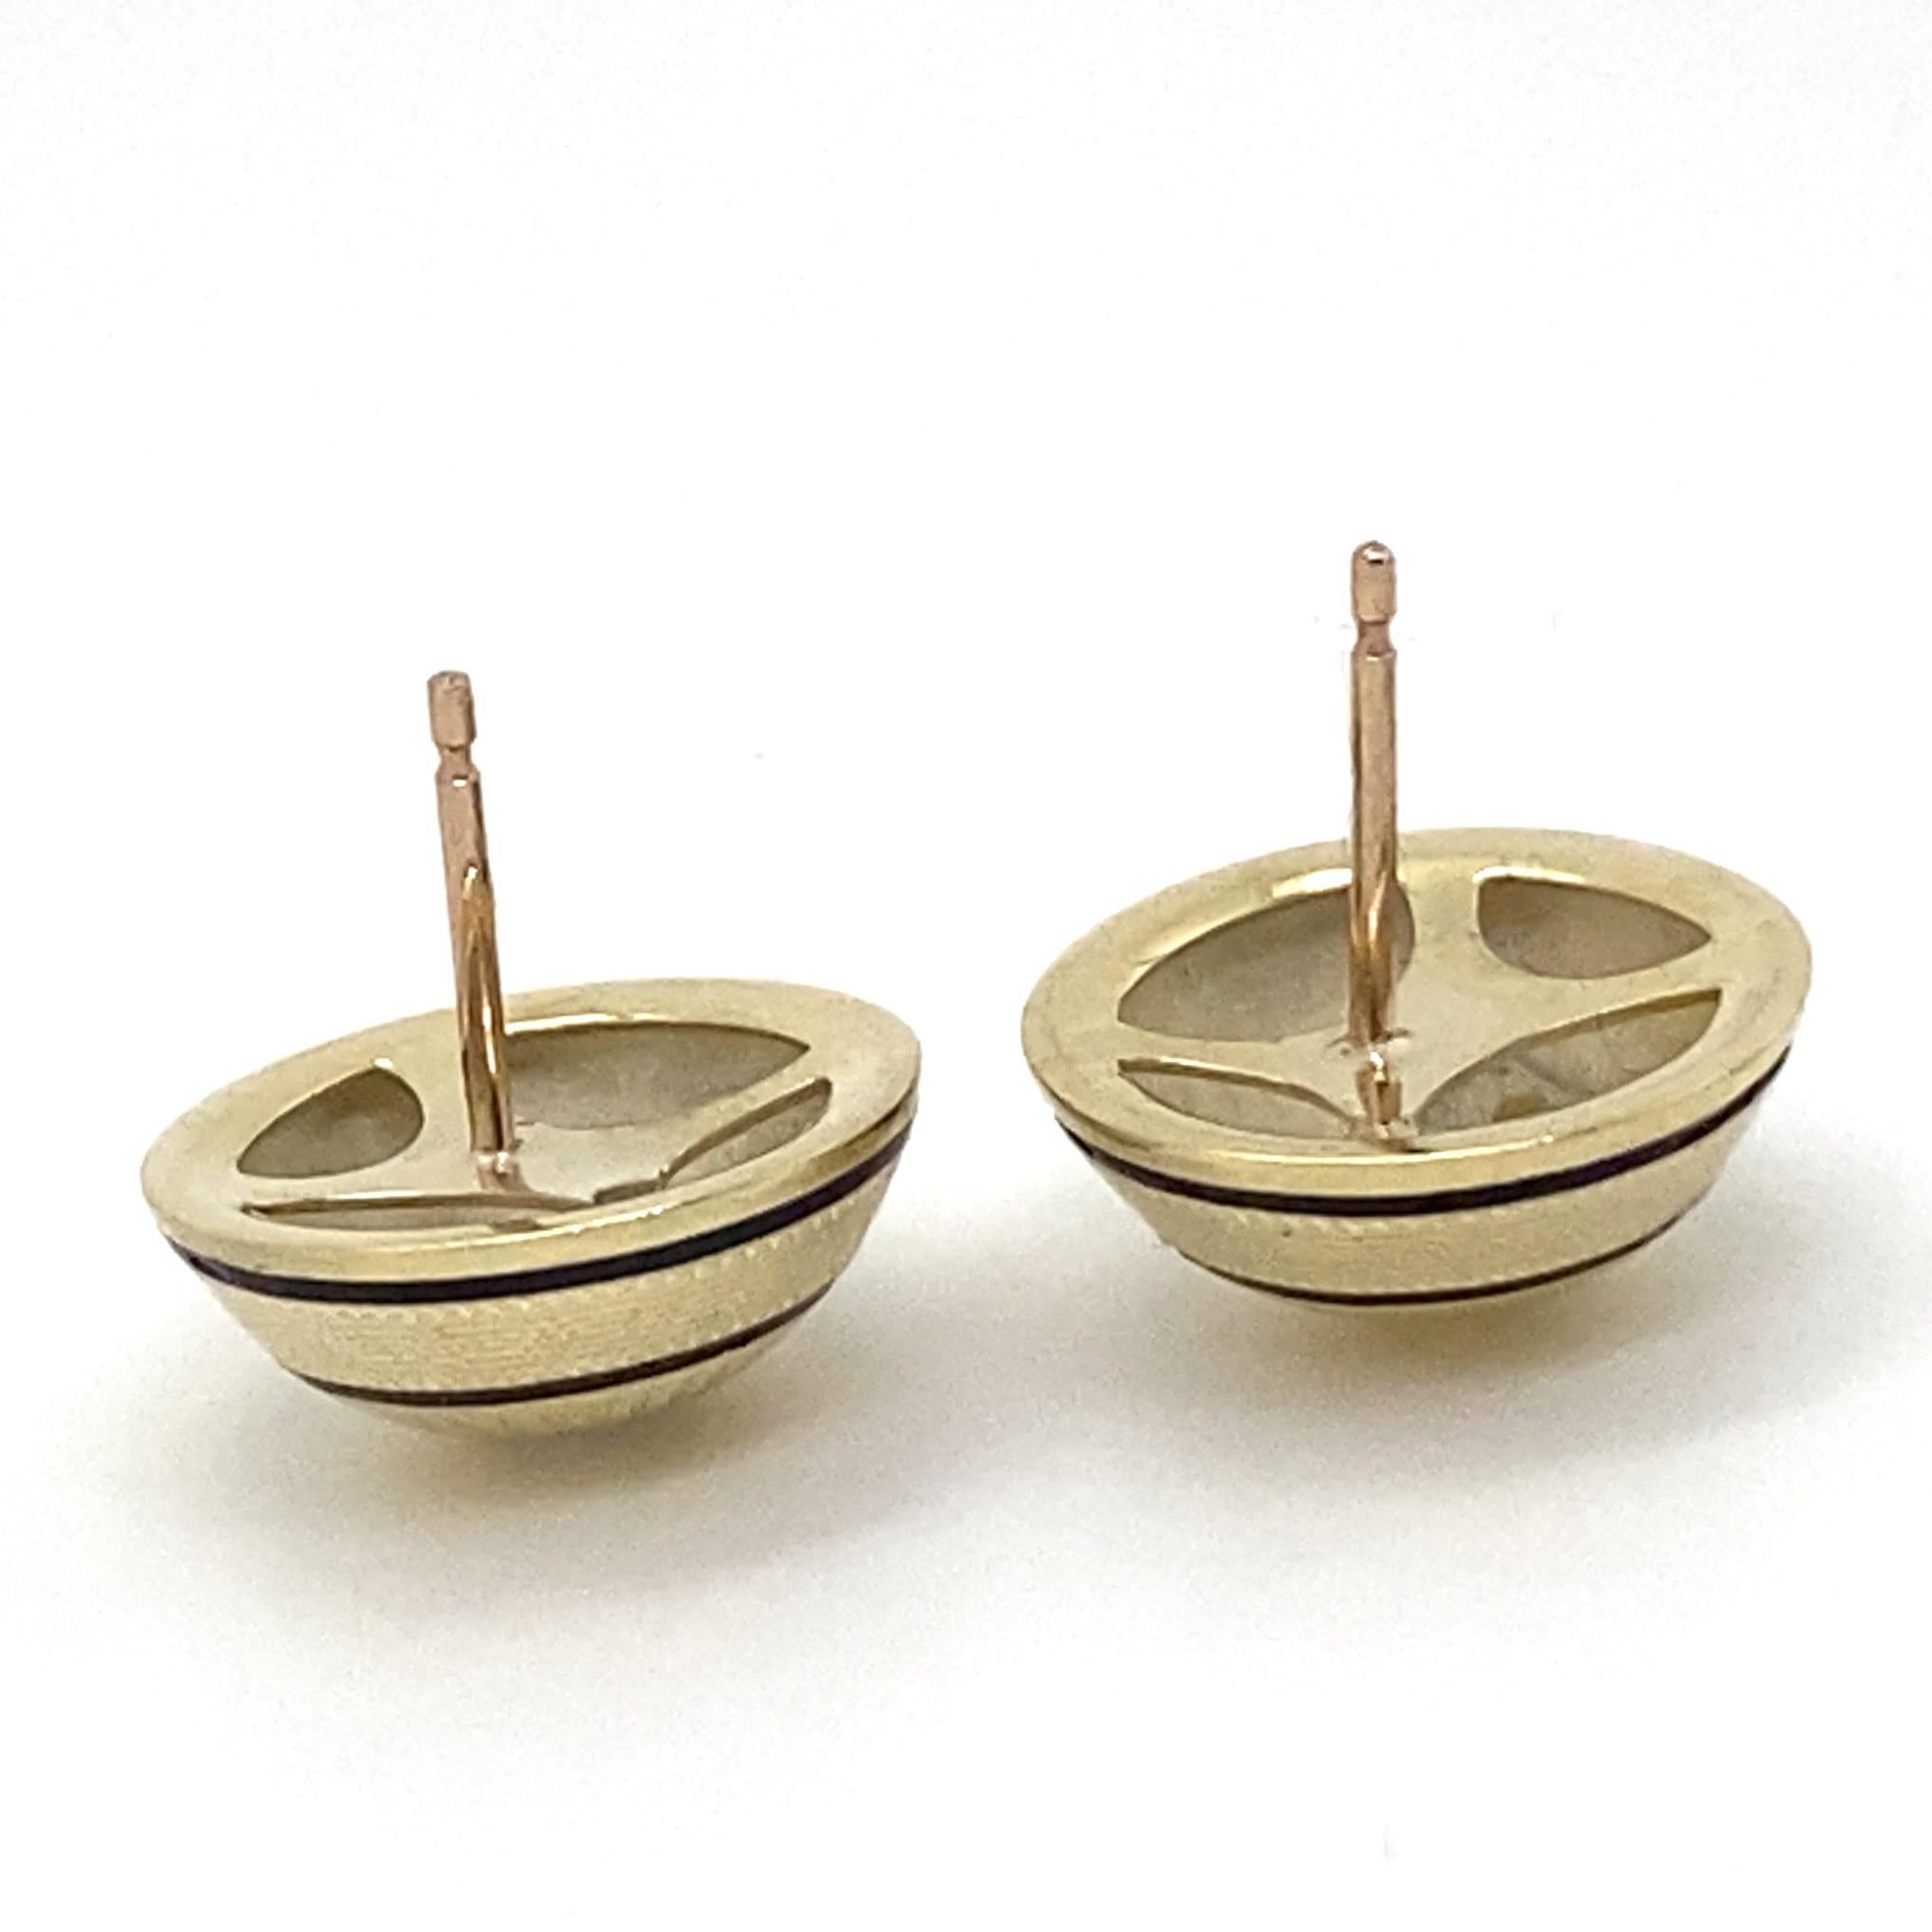 turning cufflinks into necklace